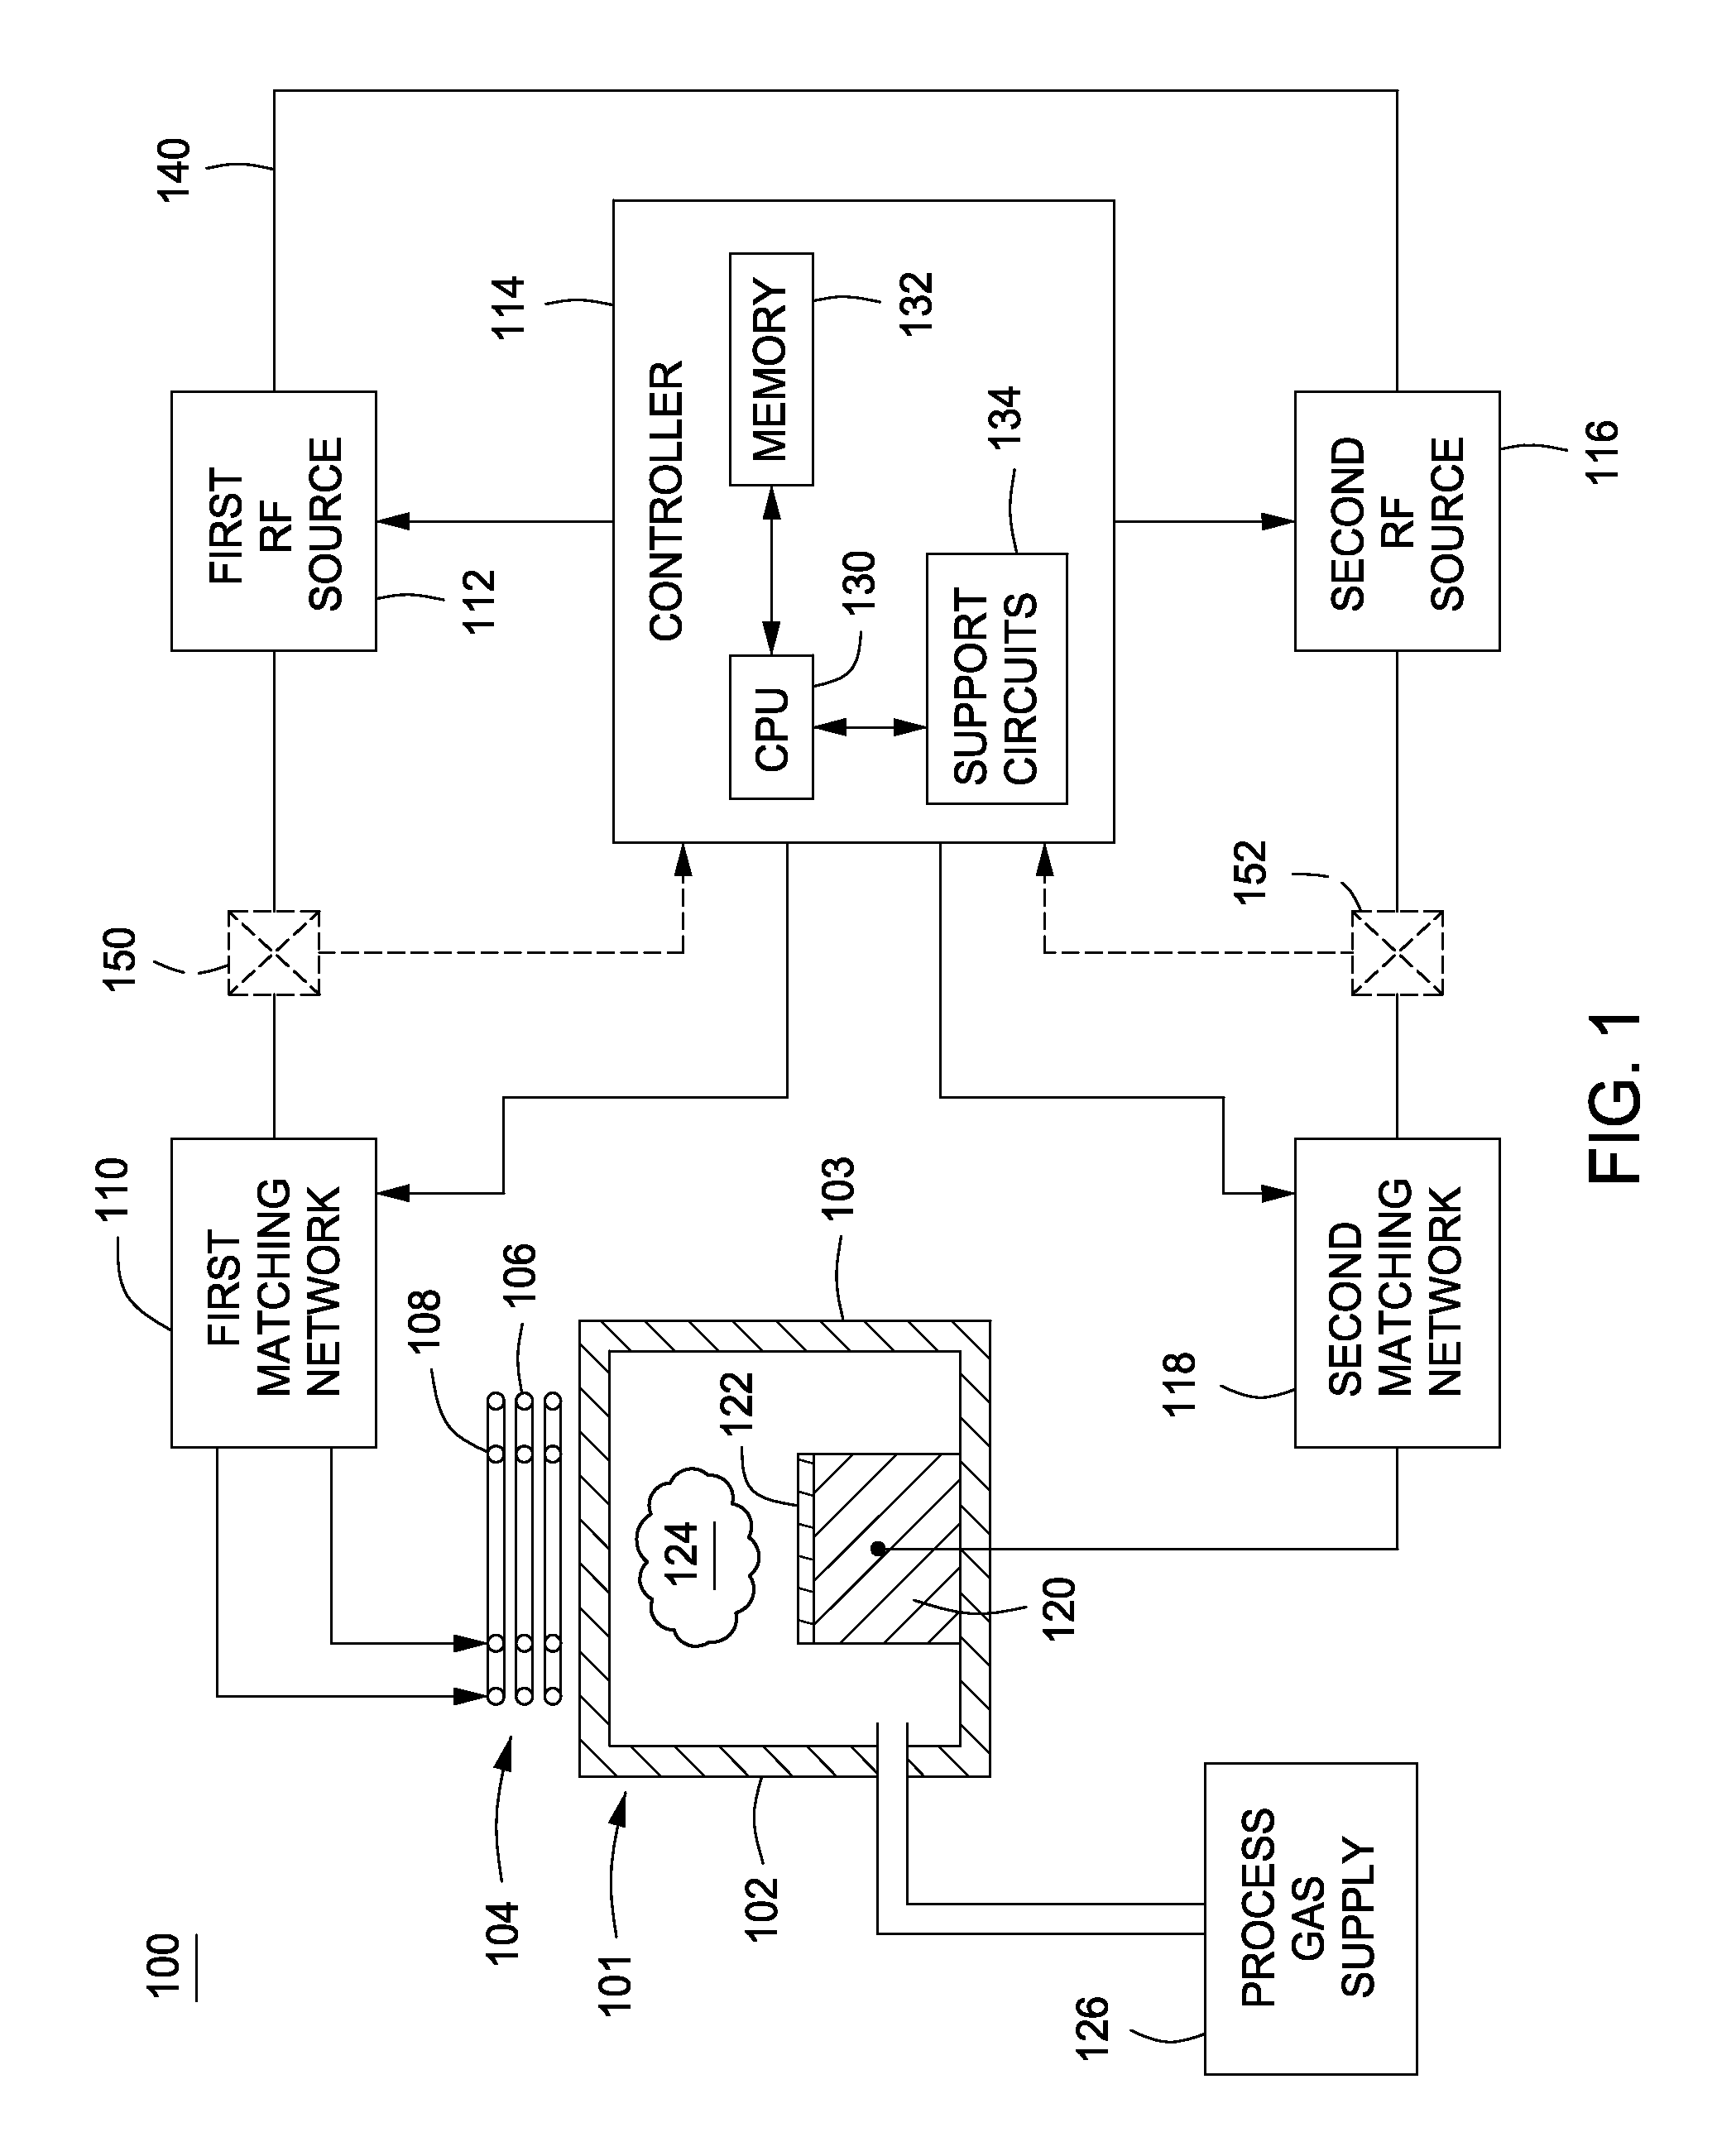 Method and apparatus for pulsed plasma processing using a time resolved tuning scheme for RF power delivery